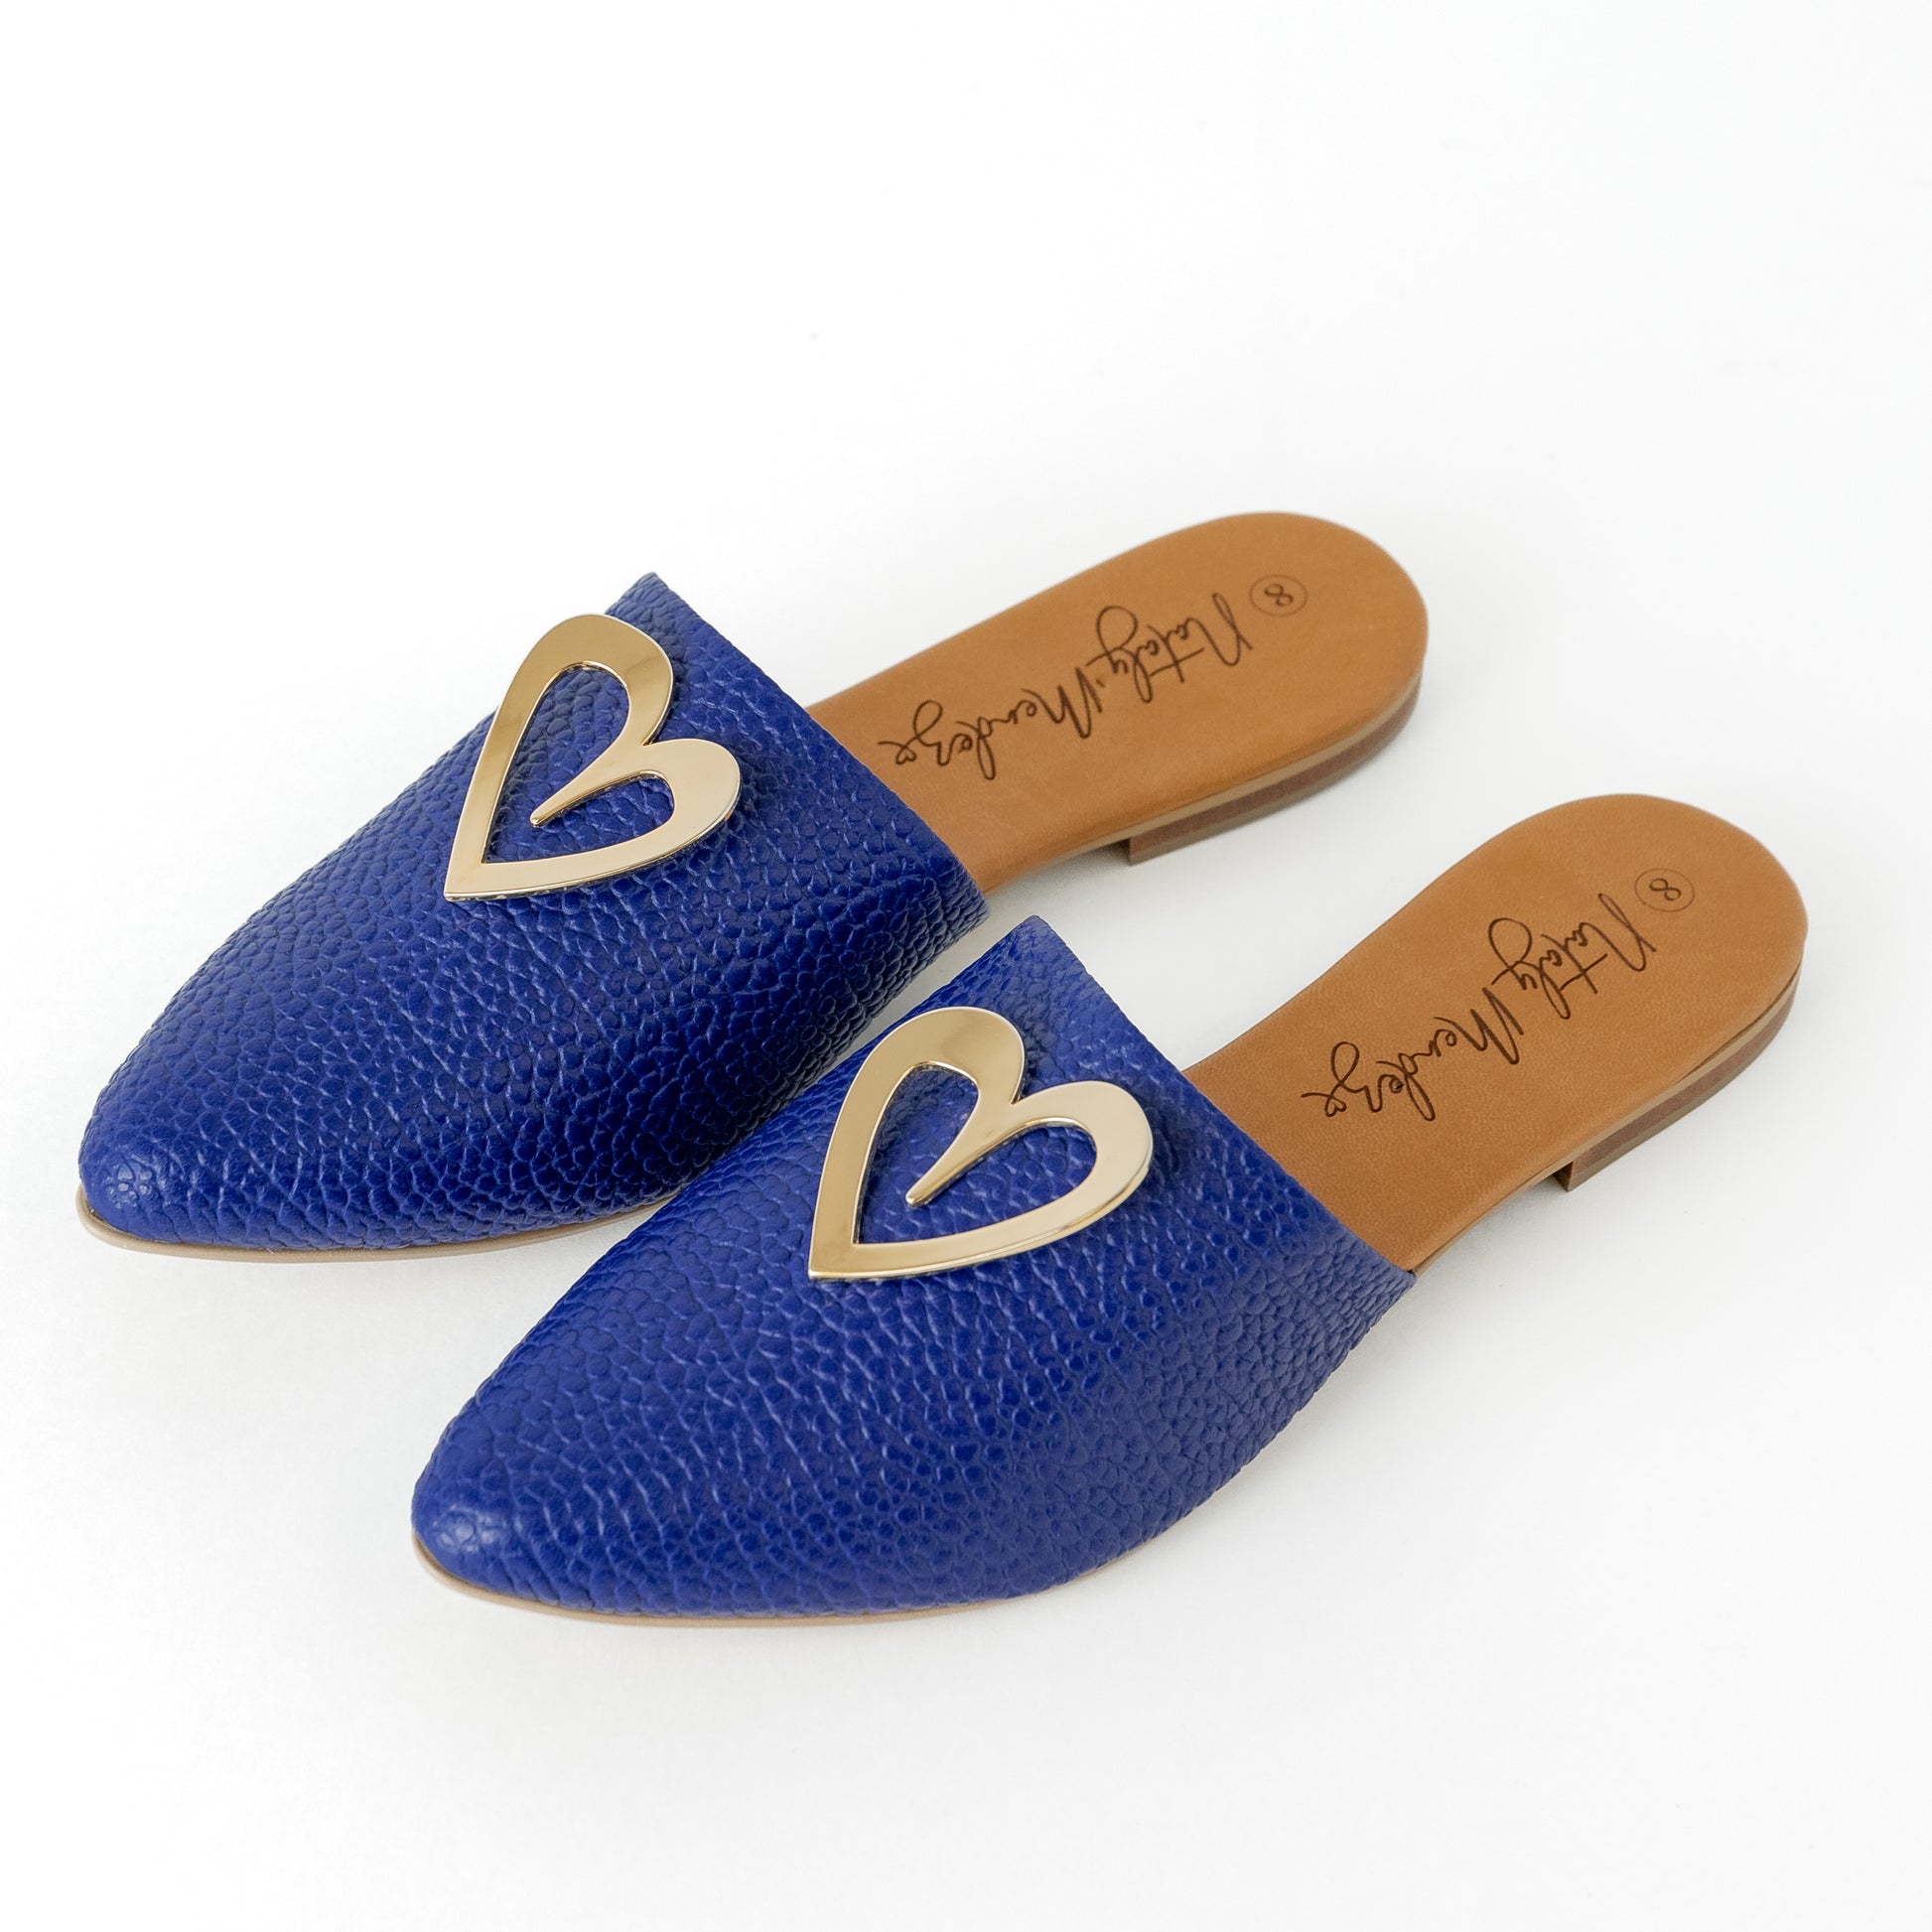 Tina Blue by Nataly Mendez FEATURES Genuine leather Insole lining made of leather Italian sole Heel height .5 cm Handmade